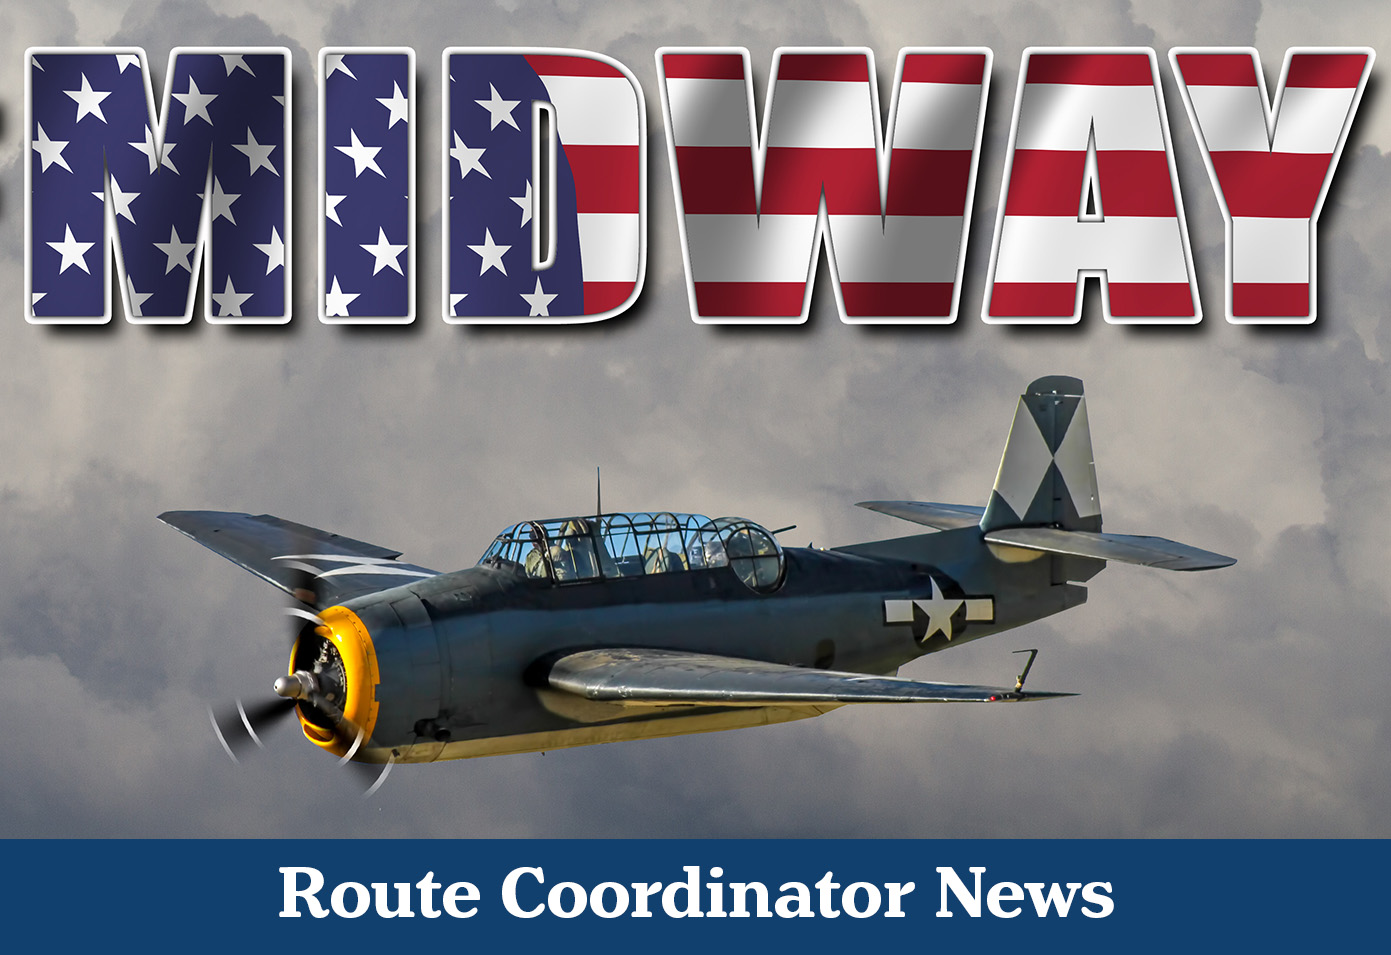 Midway Route Coordinator News